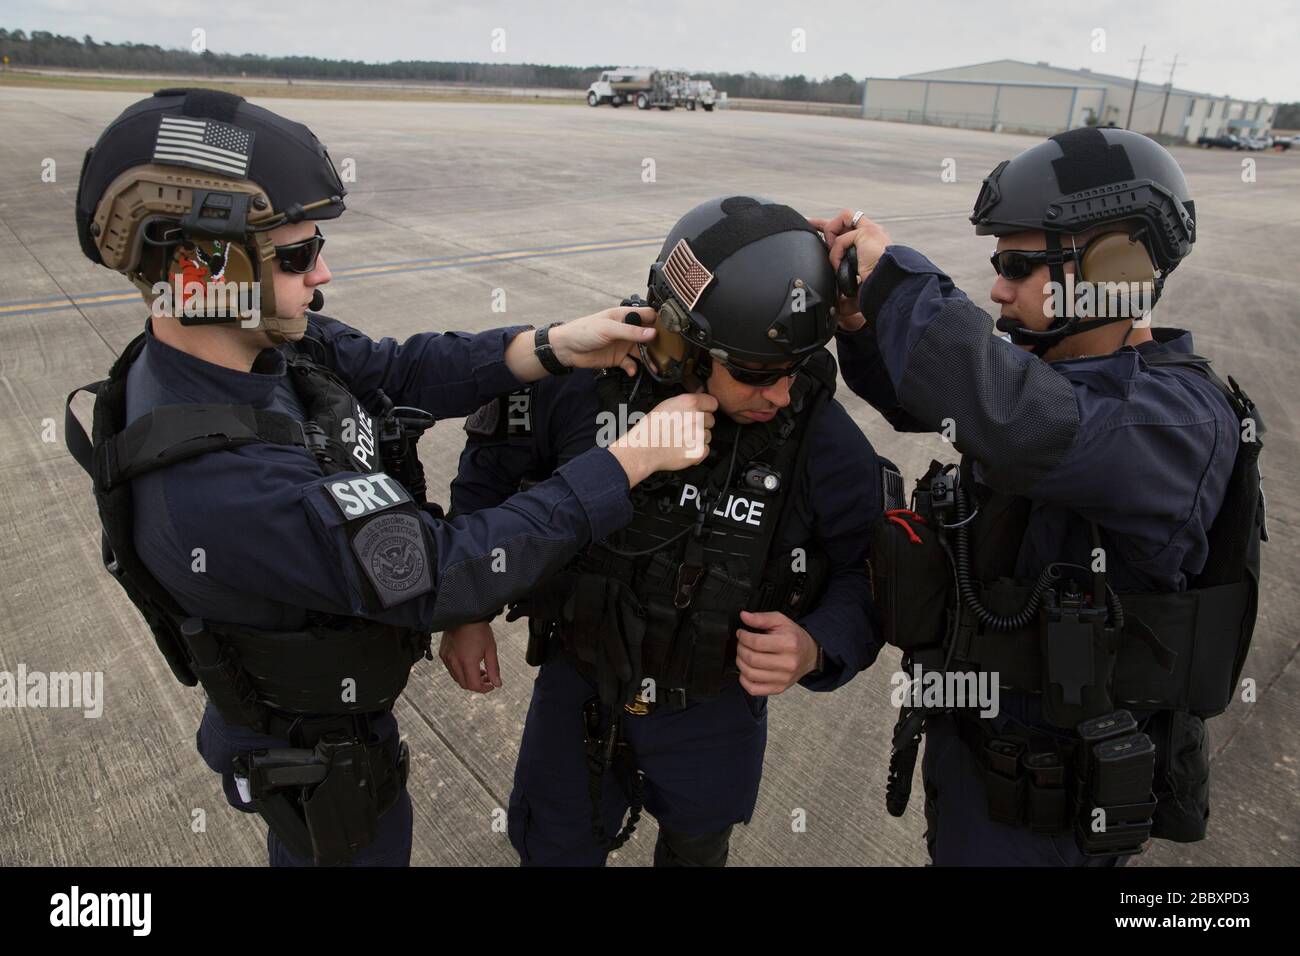 Members of the U.S. Customs and Border Protection, Office of Field Operations Special Response Team, suit-up prior to an air-intercept training exercise as they provide airspace security for Super Bowl LI, in Conroe, Texas, Feb. 1, 2017. Units with Air and Marine Operations and Office of Field Operations teamed up with the Civil Air Patrol  to practice an air-to-air intercept using two AMO UH-60 Black Hawk helicopters and two C-550 Citation jets to track down a simulated incursion into restricted airspace. Stock Photo